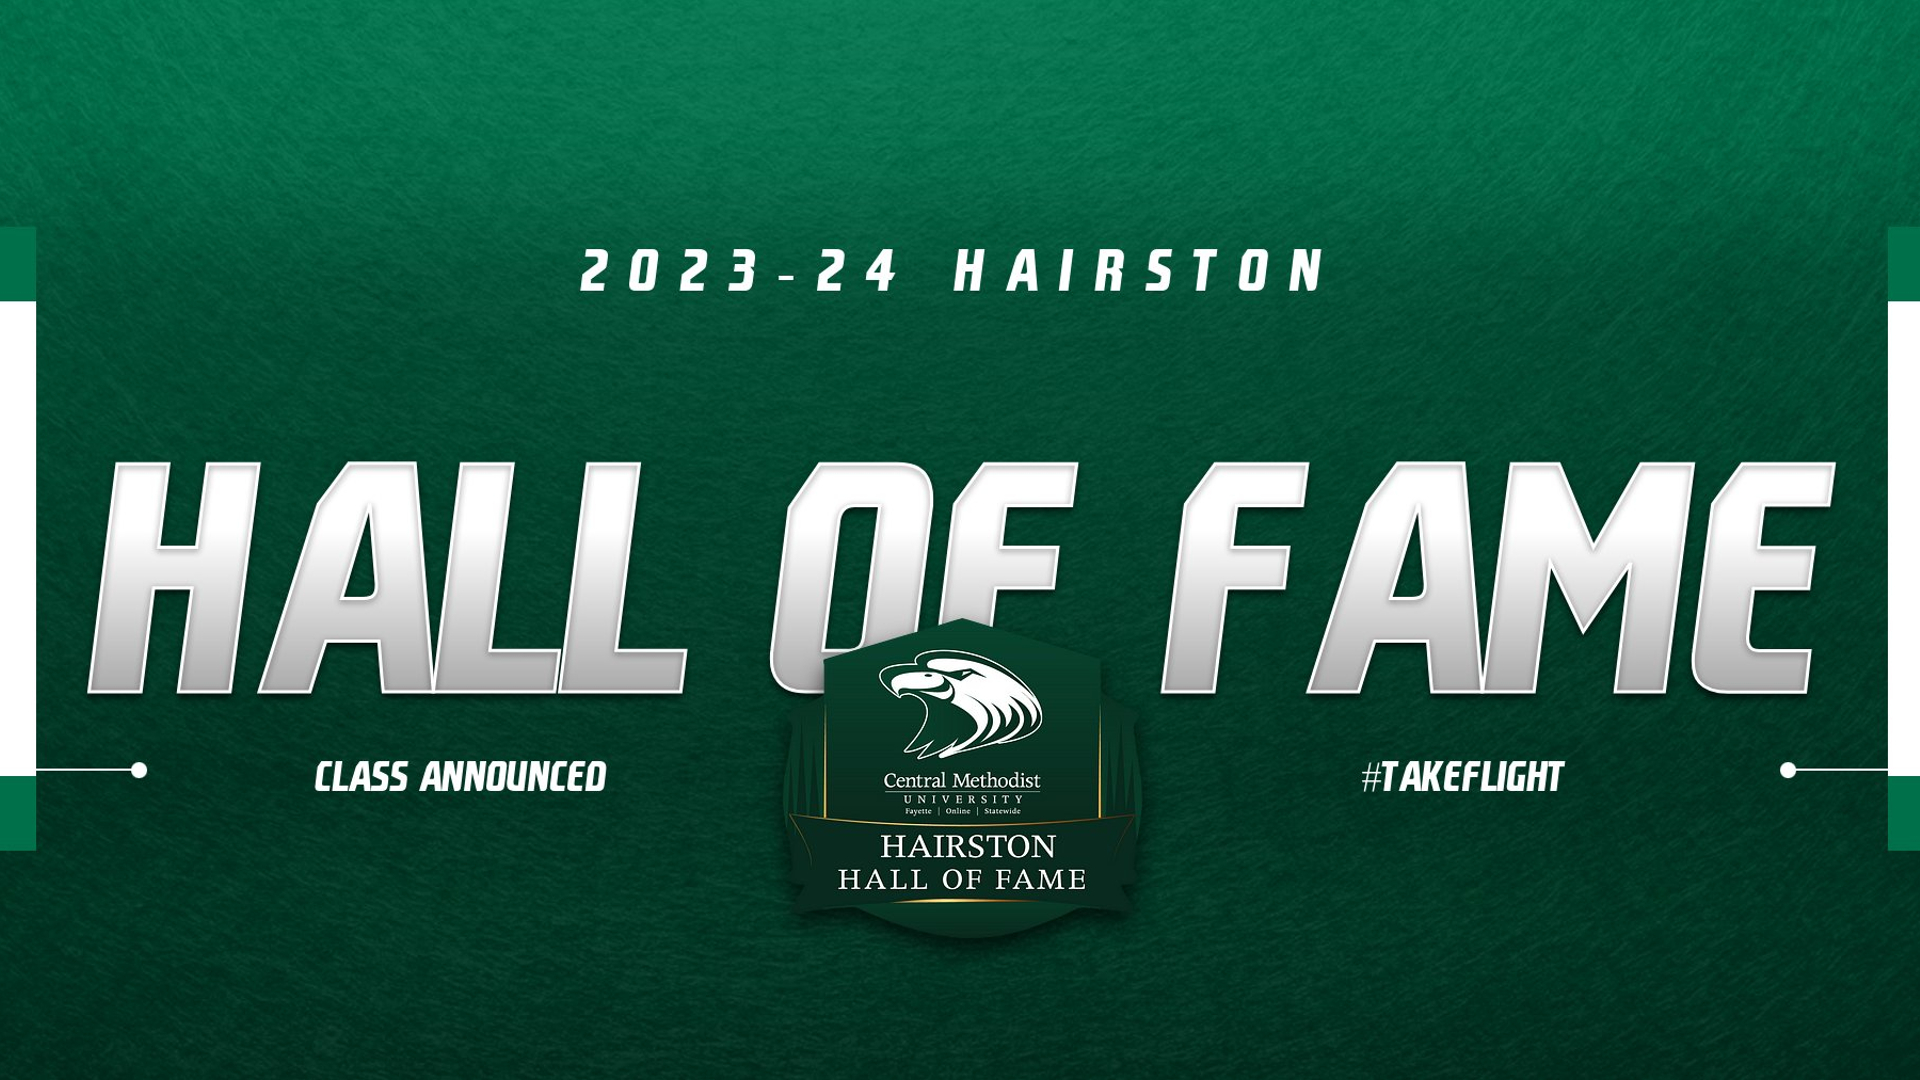 2023-24 Hairston Hall of Fame Class Announced